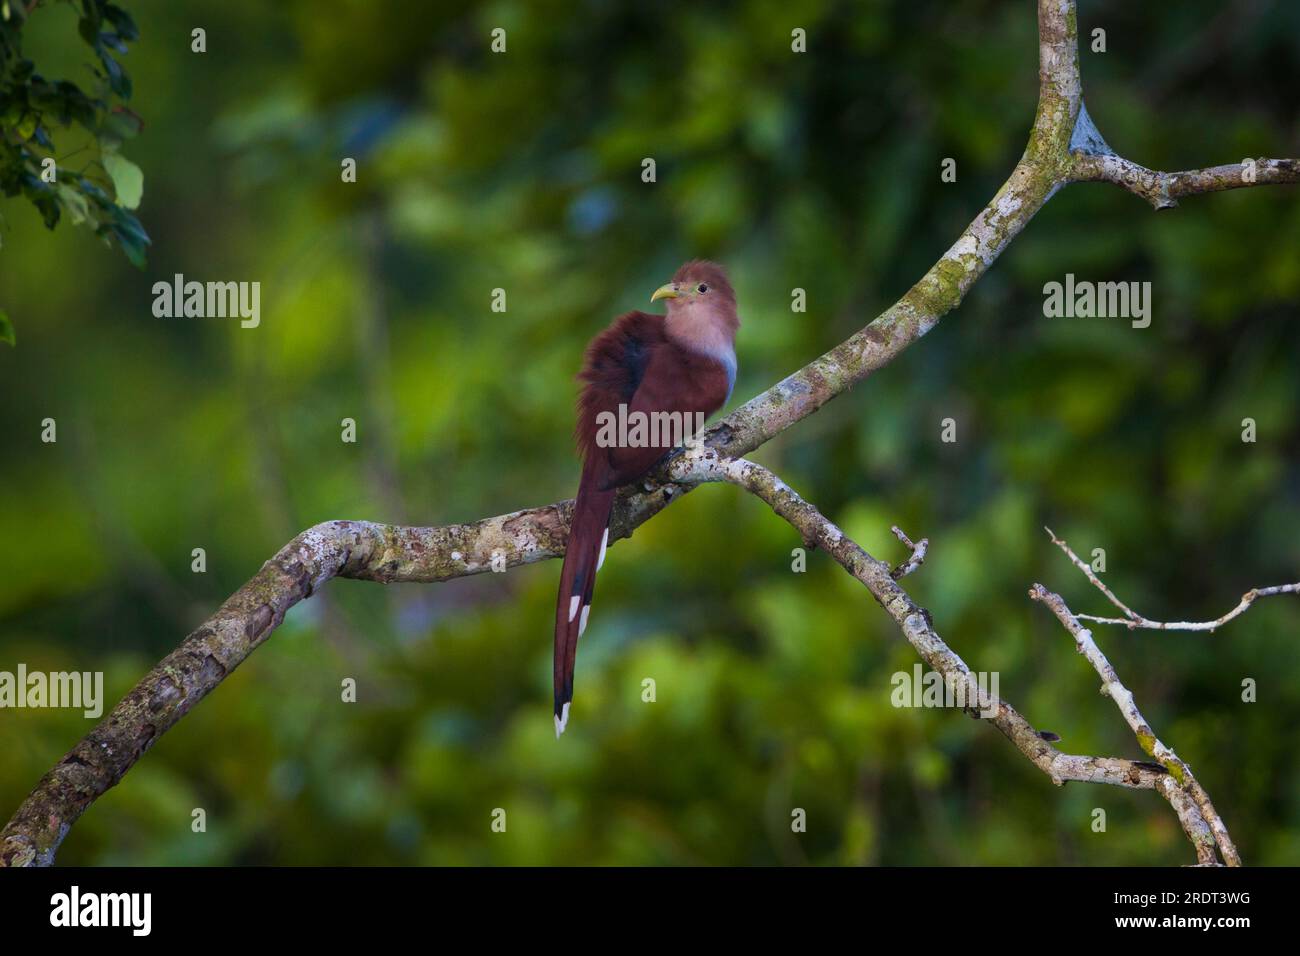 The beautiful bird Squirrel Cuckoo, Piaya cayana, is sitting on a branch in the rainforest of Soberania national park, Republic of Panama. Stock Photo